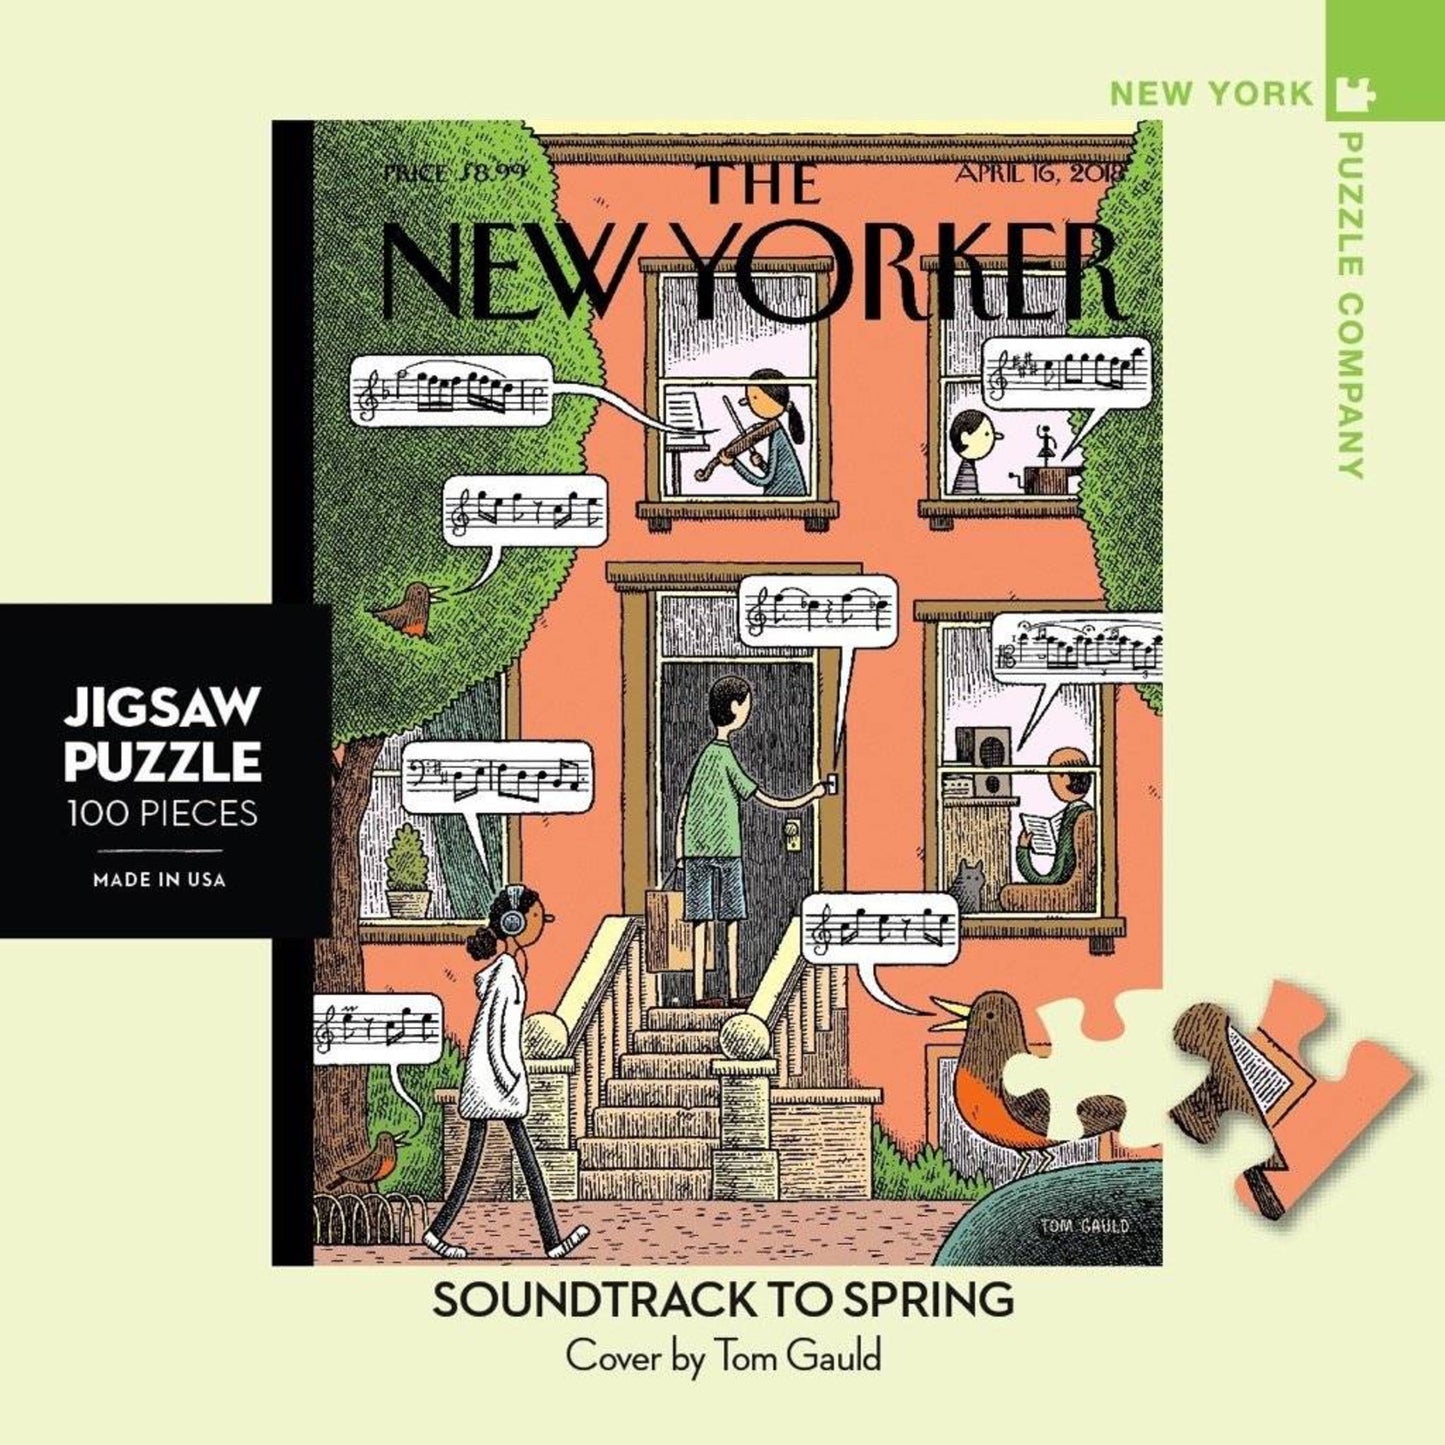 The New Yorker, Soundtrack to Spring Puzzle